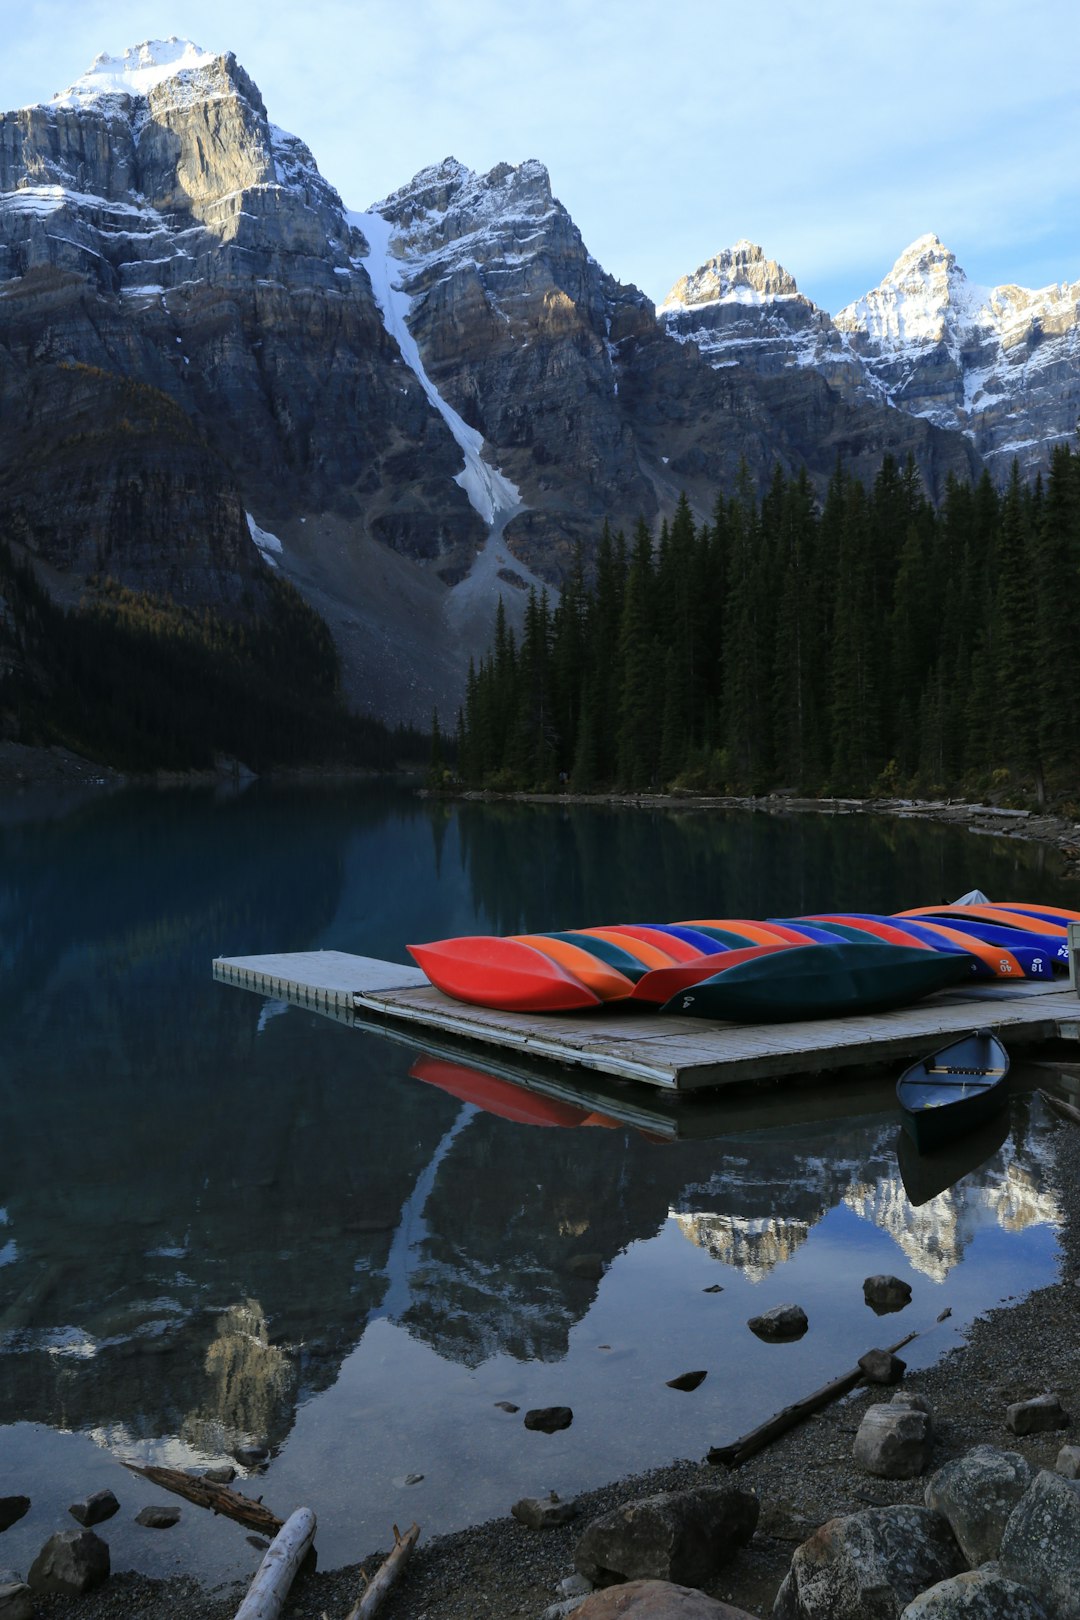 red and white boat on lake near green trees and mountain during daytime